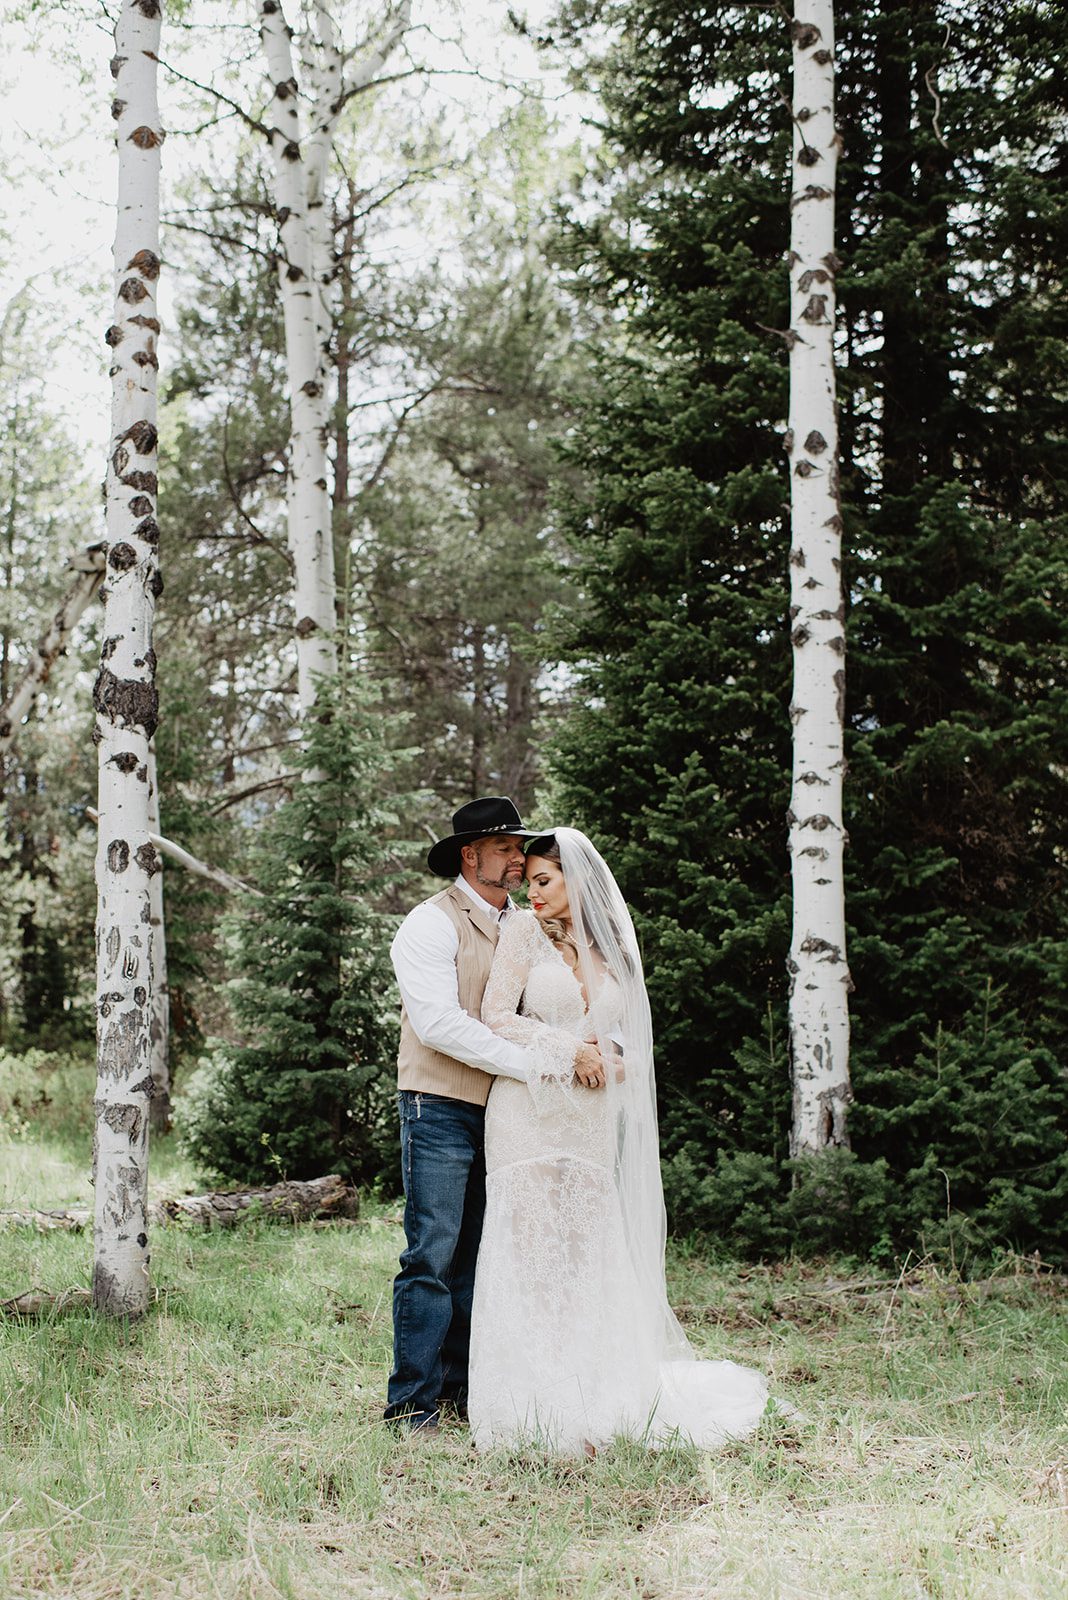 Jackson Hole wedding photographer captures groom standing behind bride and holding her waist while she leans back to kiss him over her shoulder